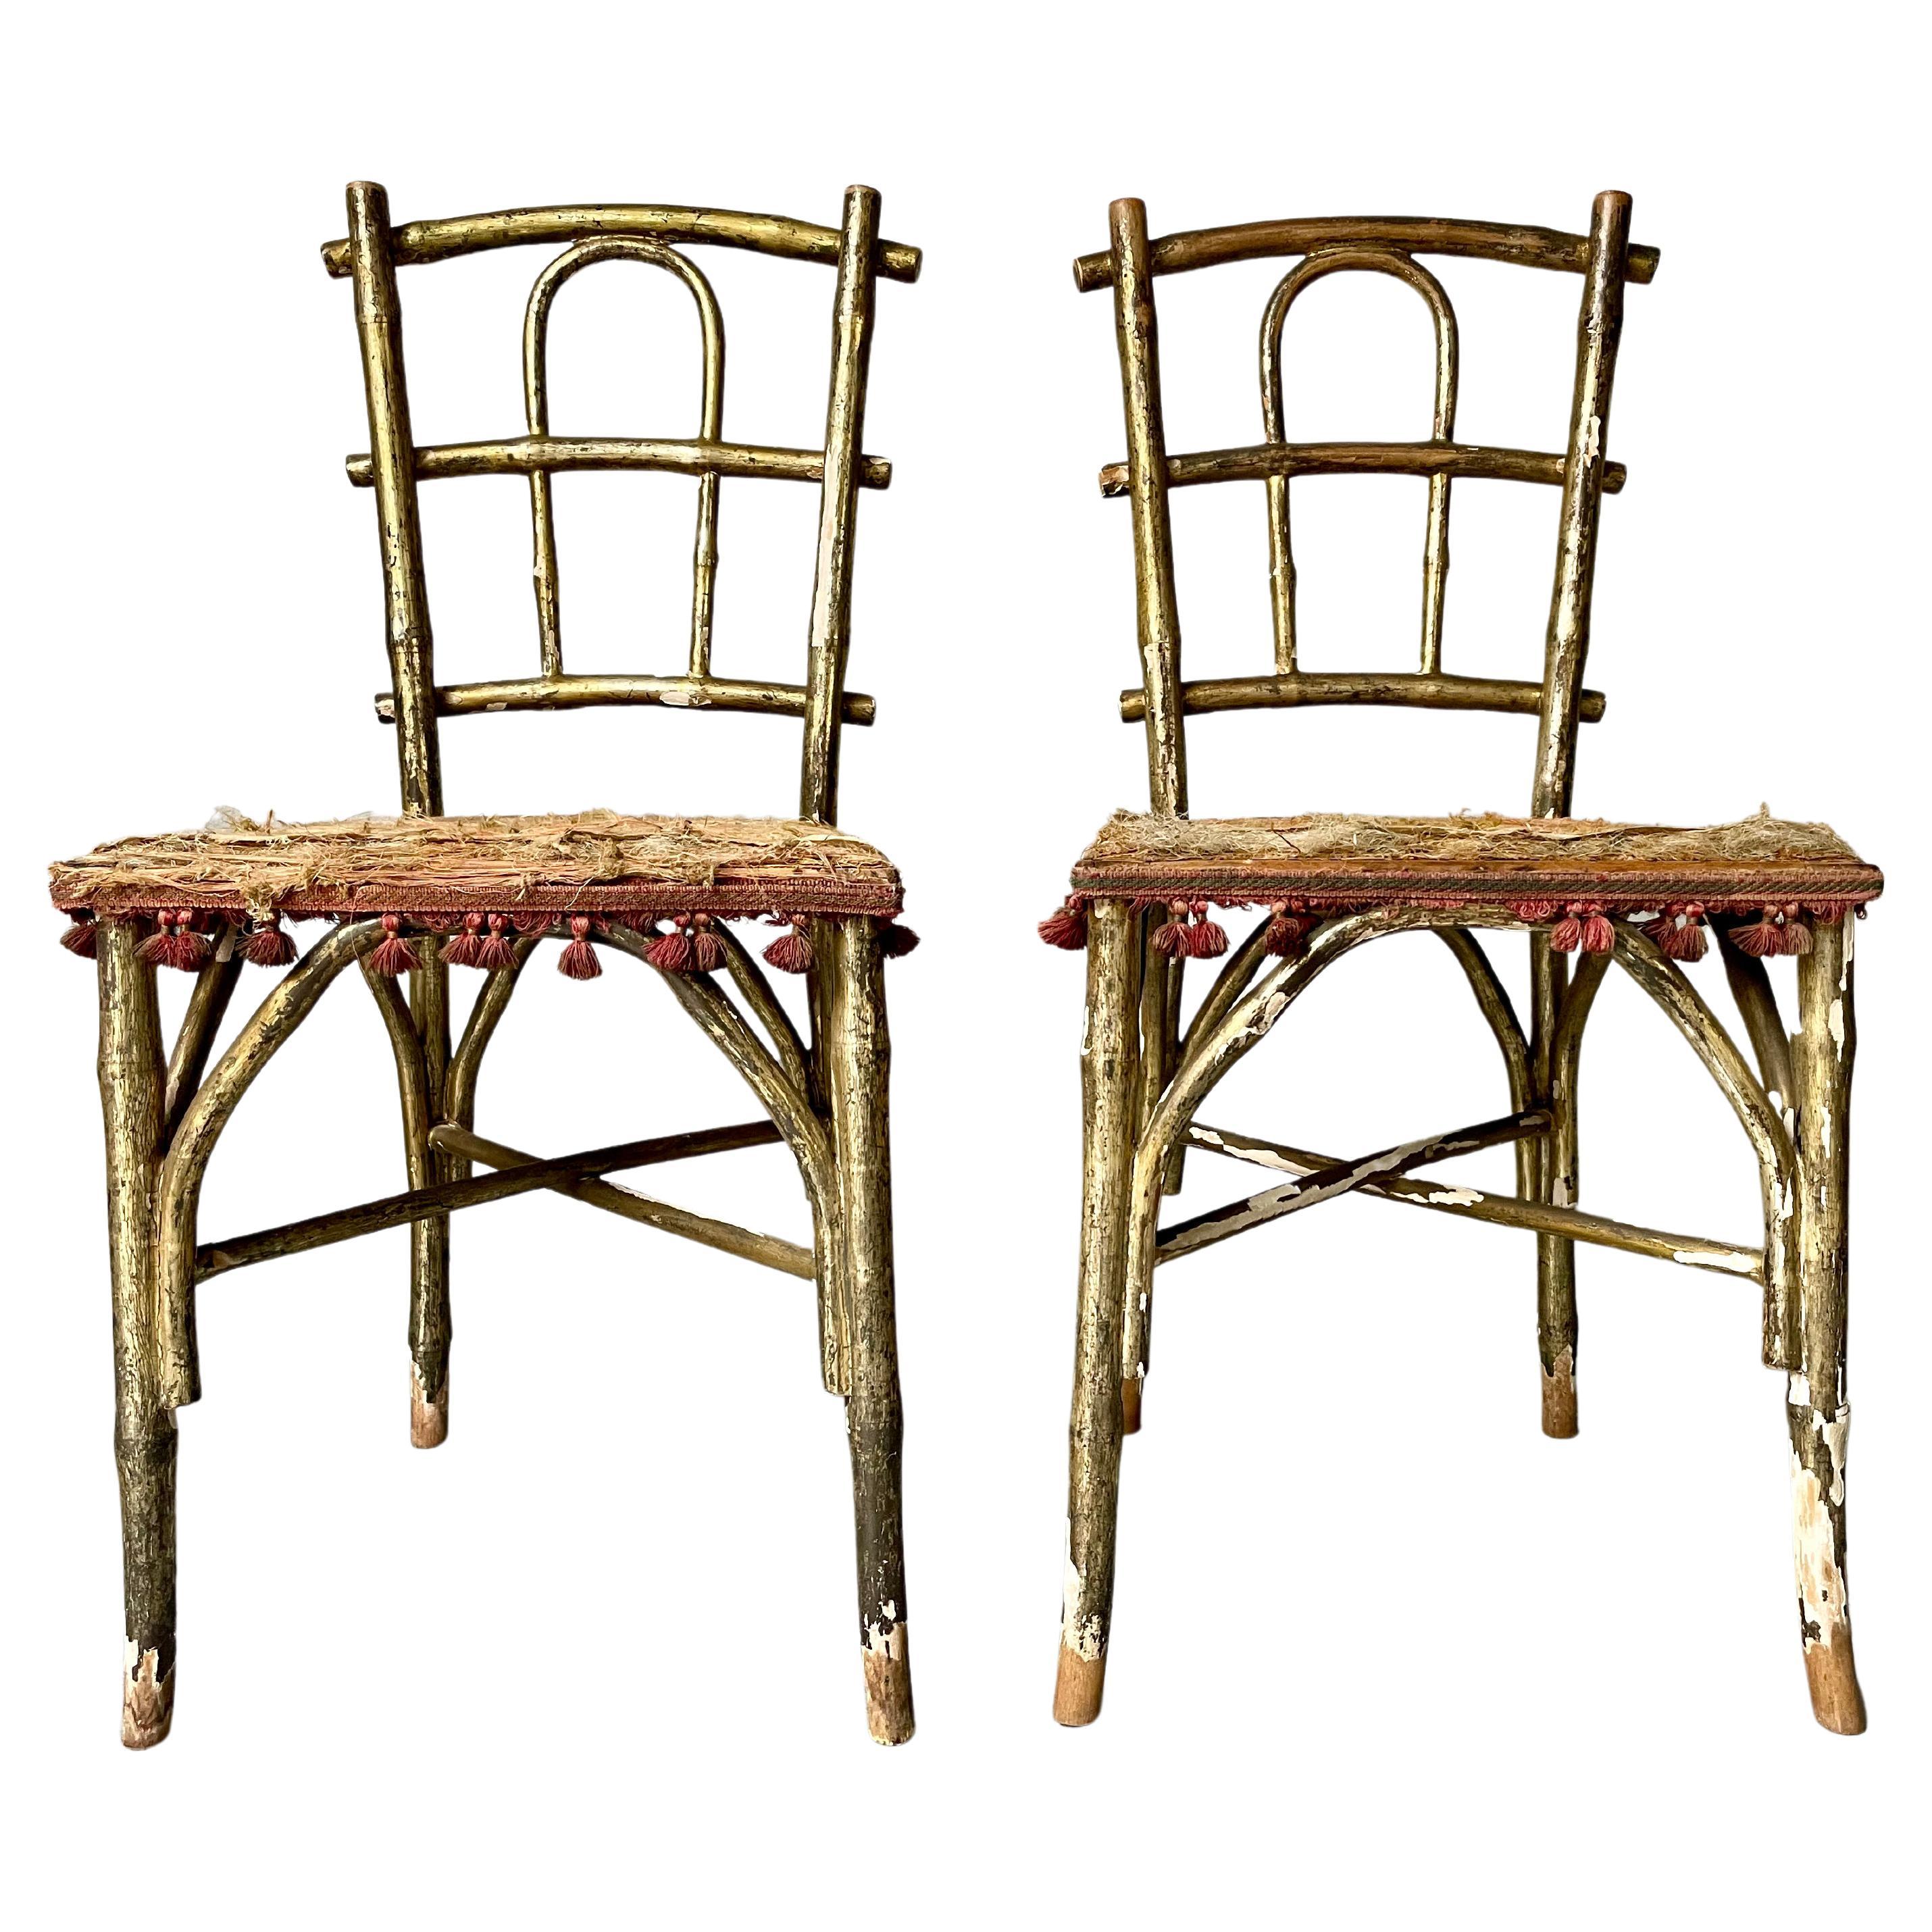 Pair of 19th century Faux Bamboo Parlor Chairs by Thonet For Sale